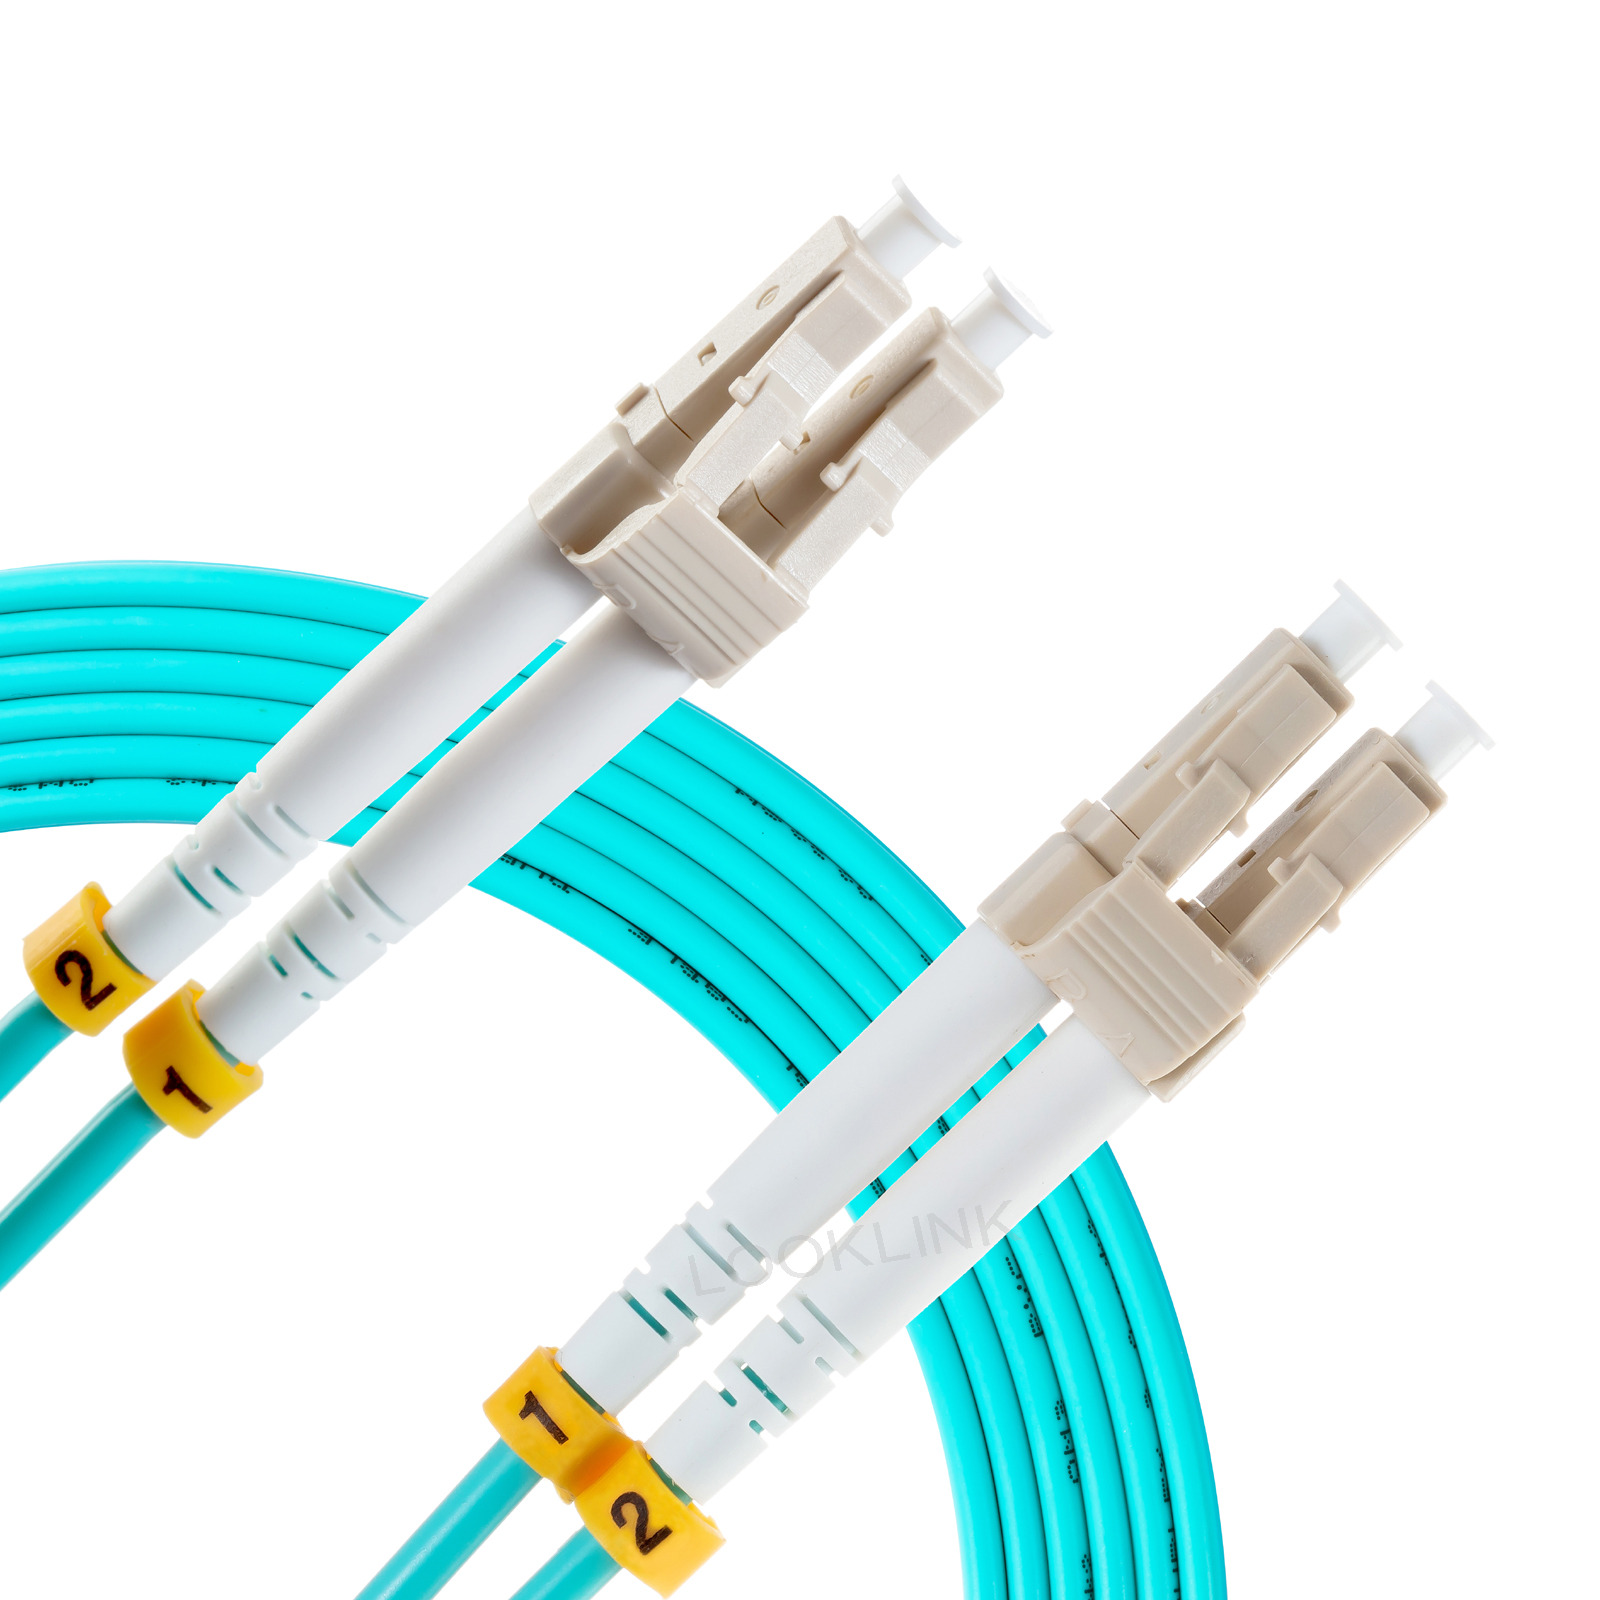 60M-100M Length 10G-50/125 OM3 Multimode Duplex LC to LC Fiber Optic Patch Cable